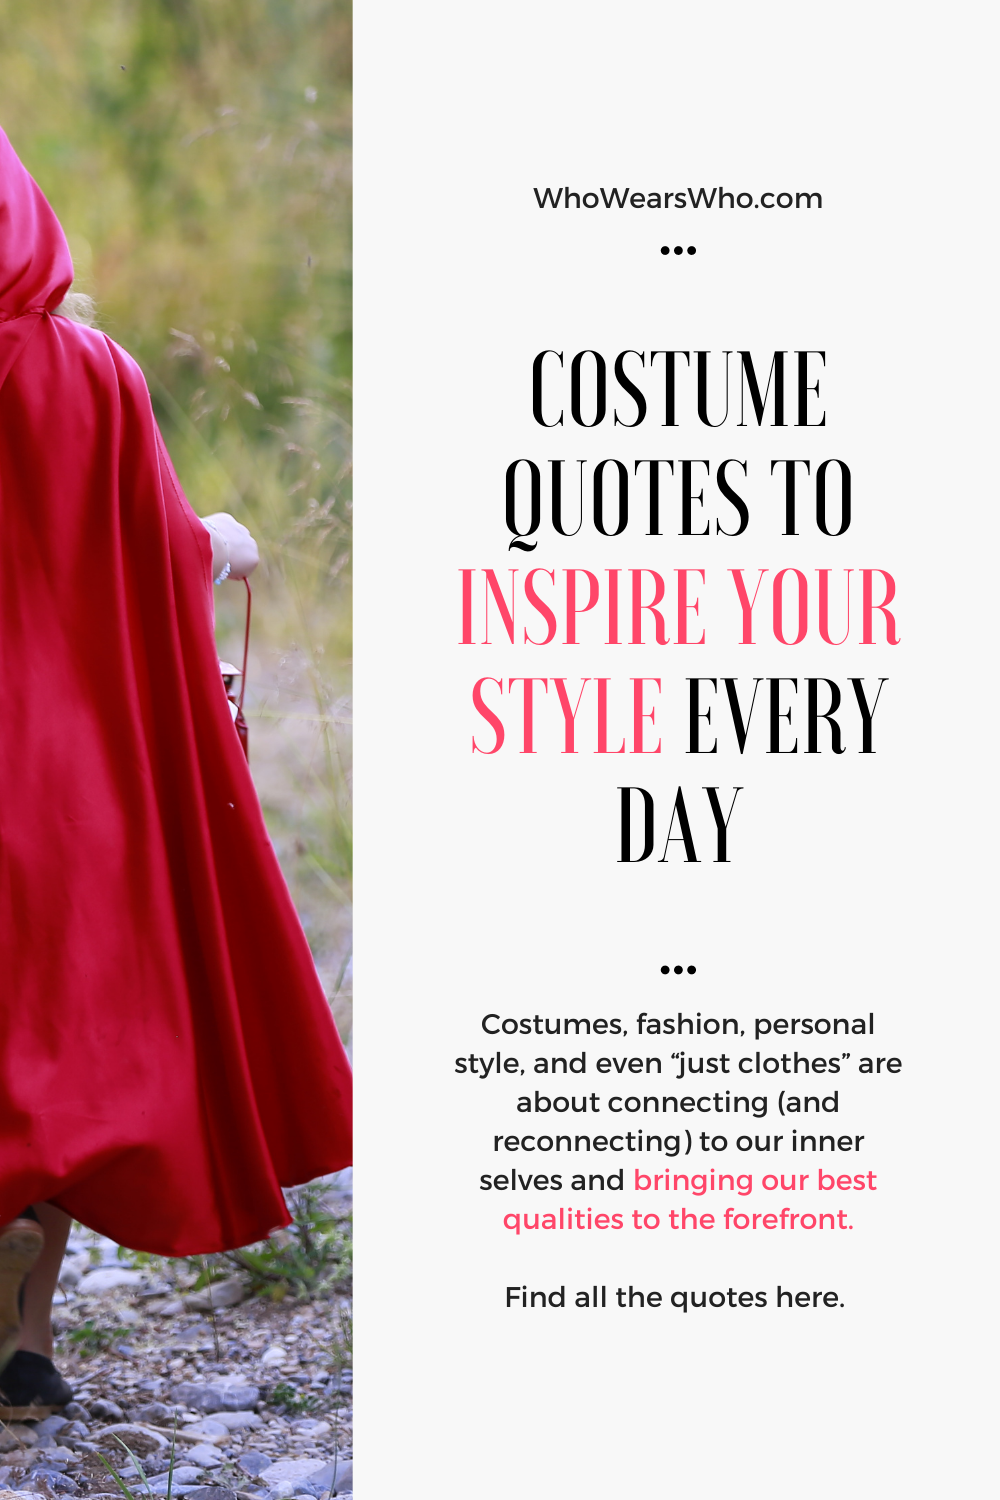 Costume quotes to inspire your style every day